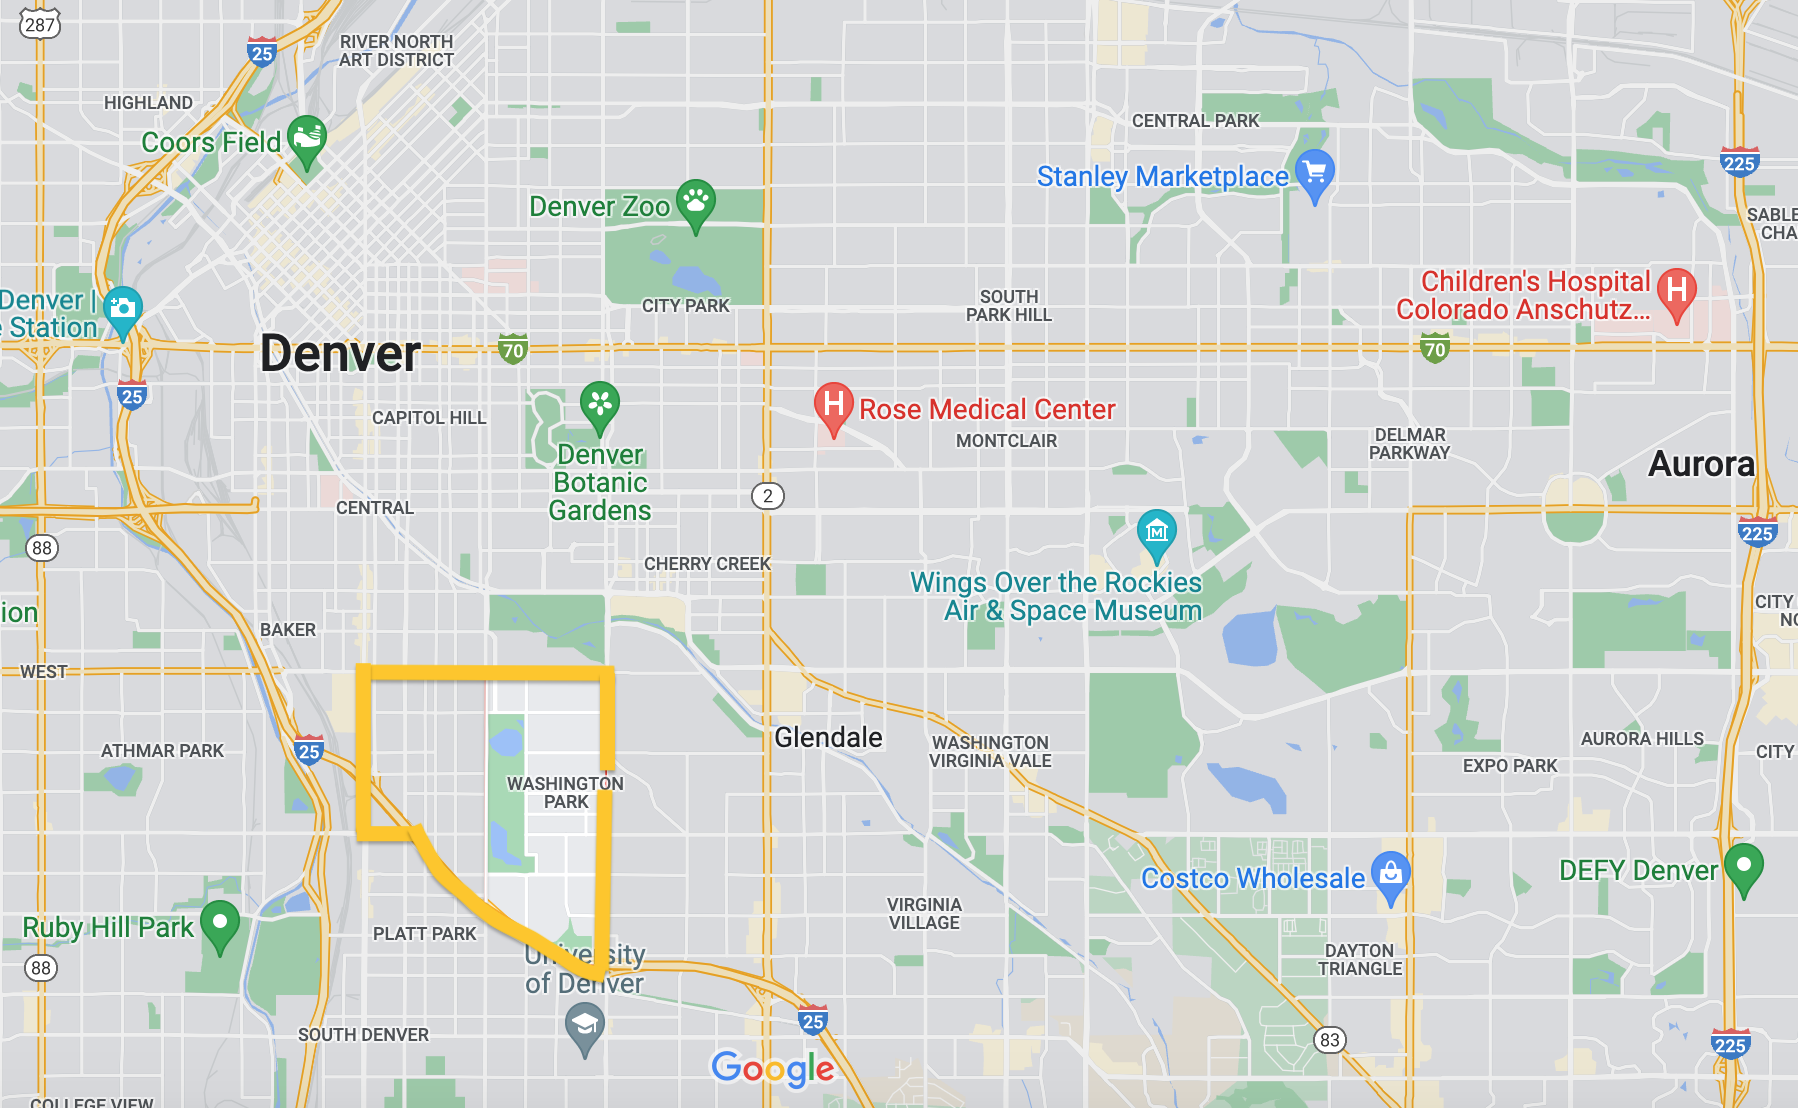 Washington Park is located in south central Denver